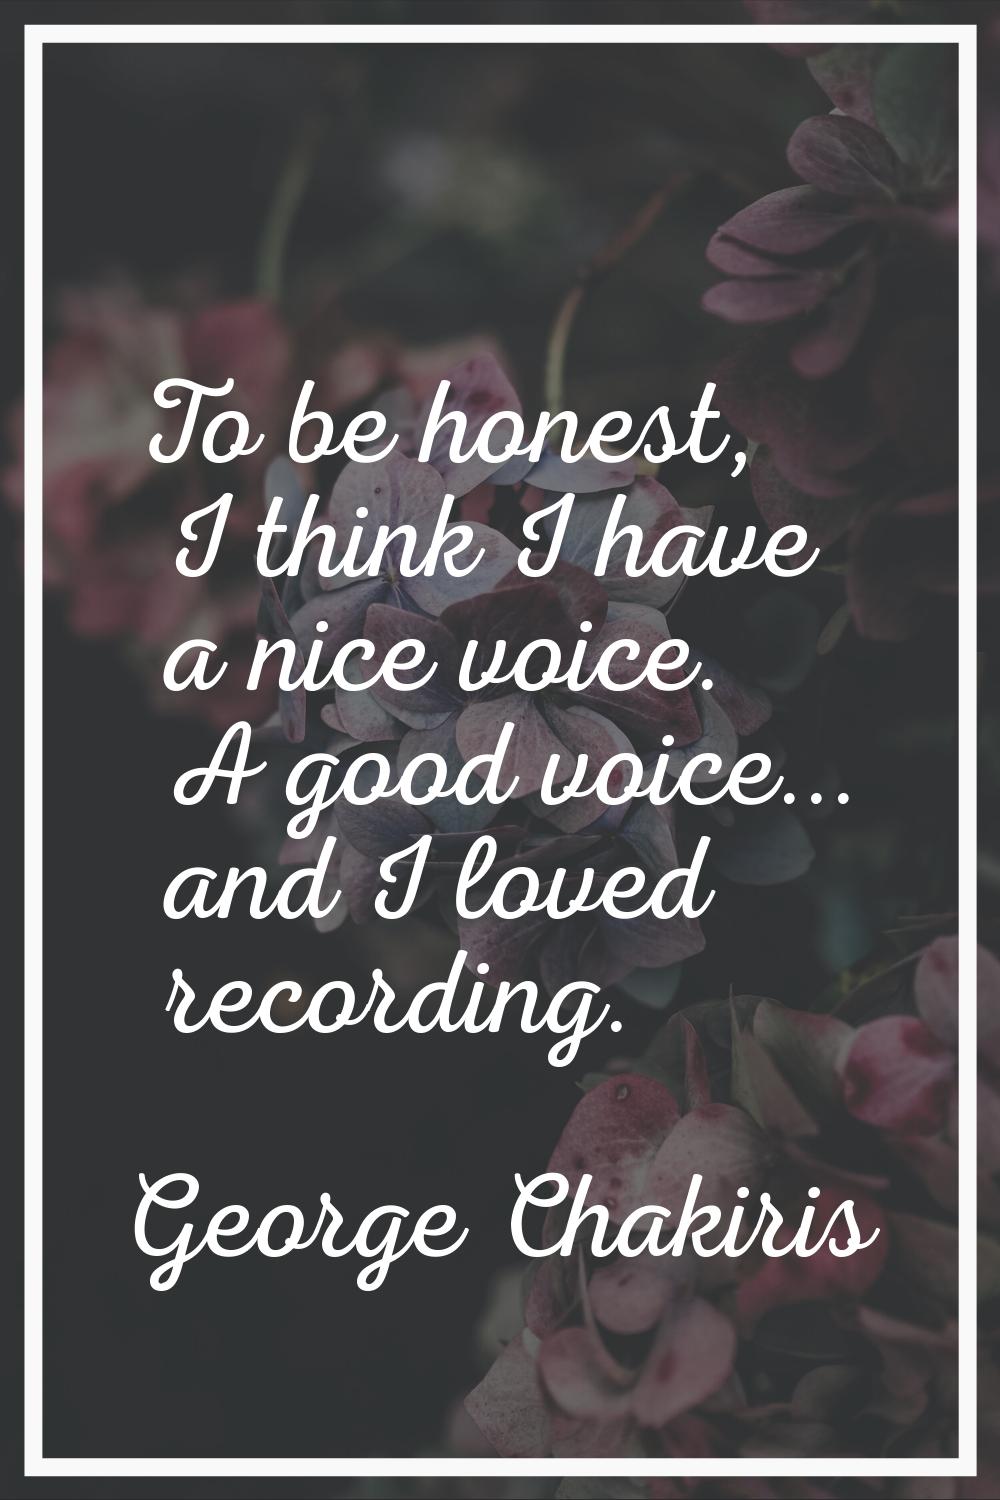 To be honest, I think I have a nice voice. A good voice... and I loved recording.